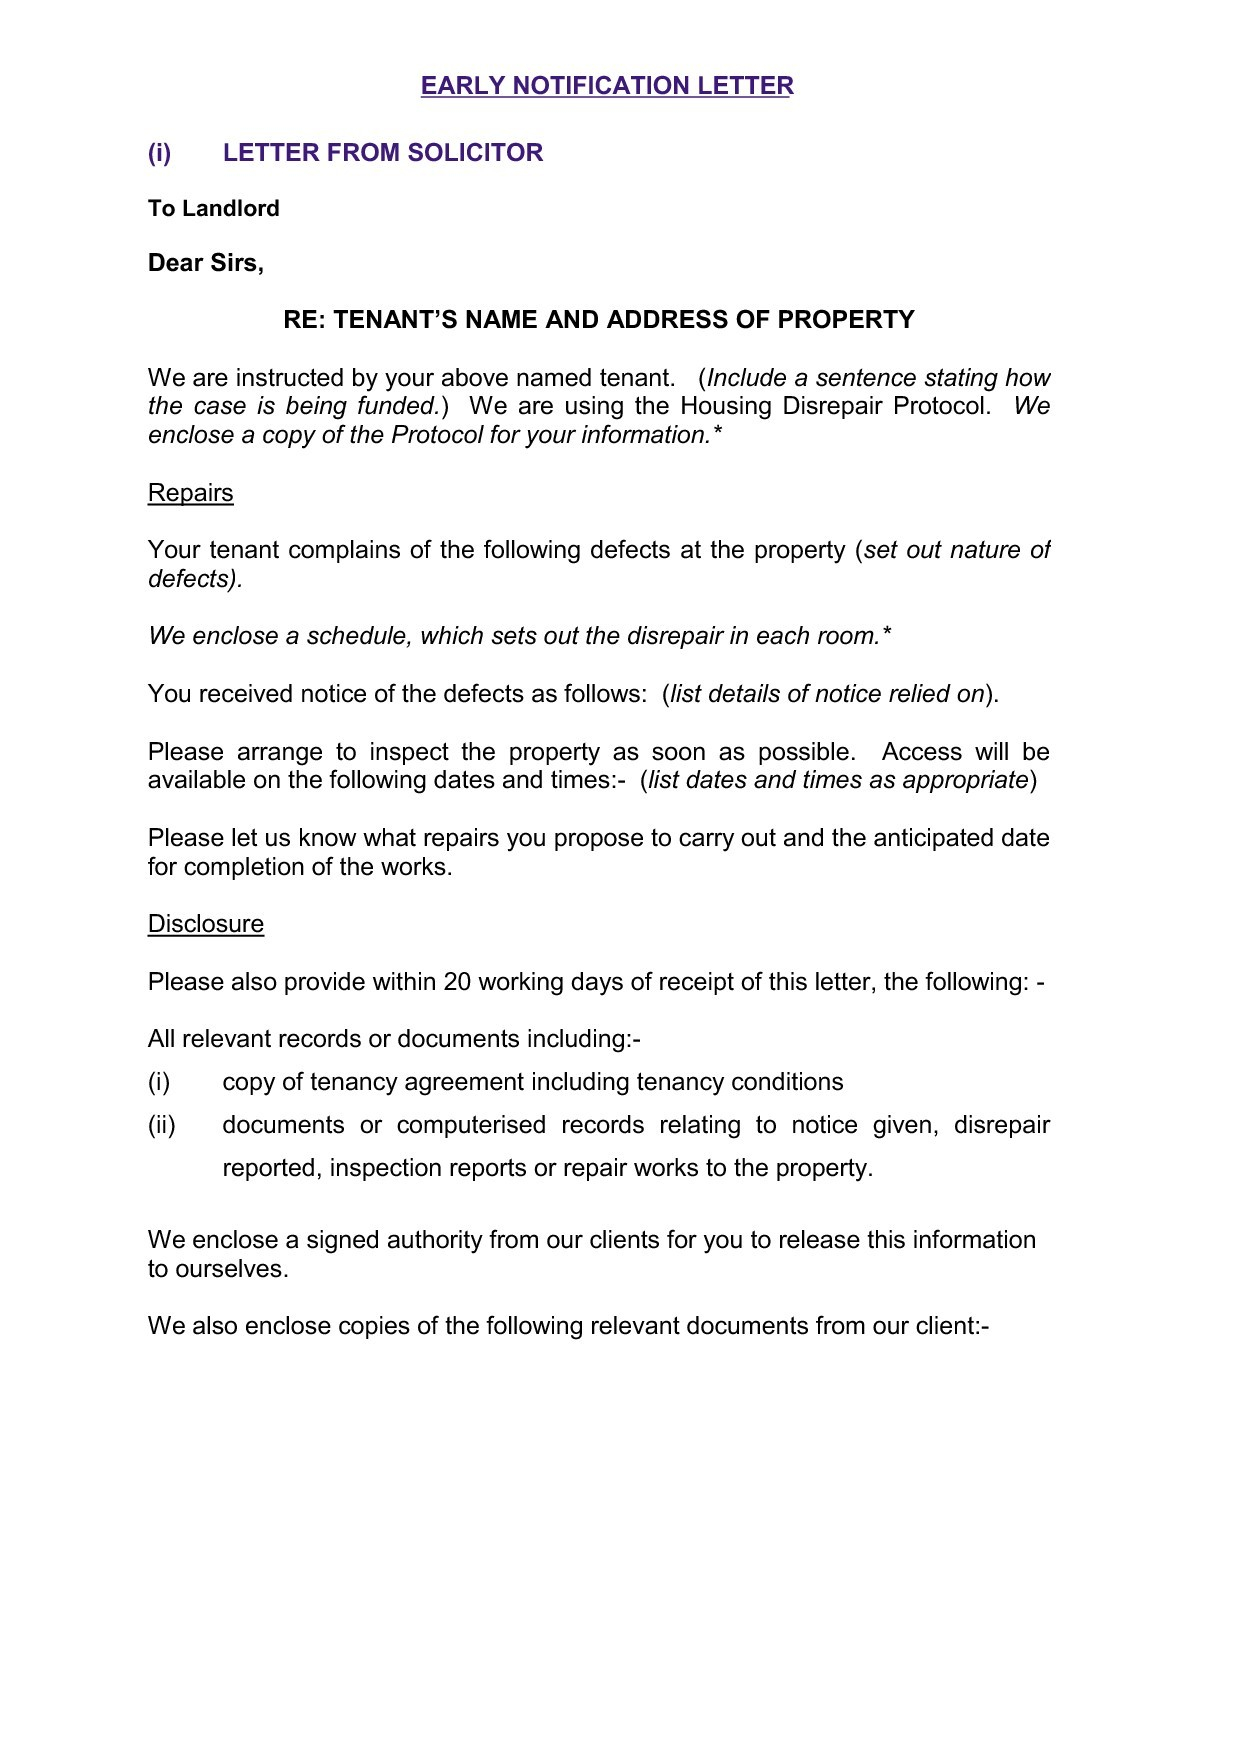 Landlord Property Inspection Letter Template - Property Inspection Letter to Tenant Uk Archives New Property